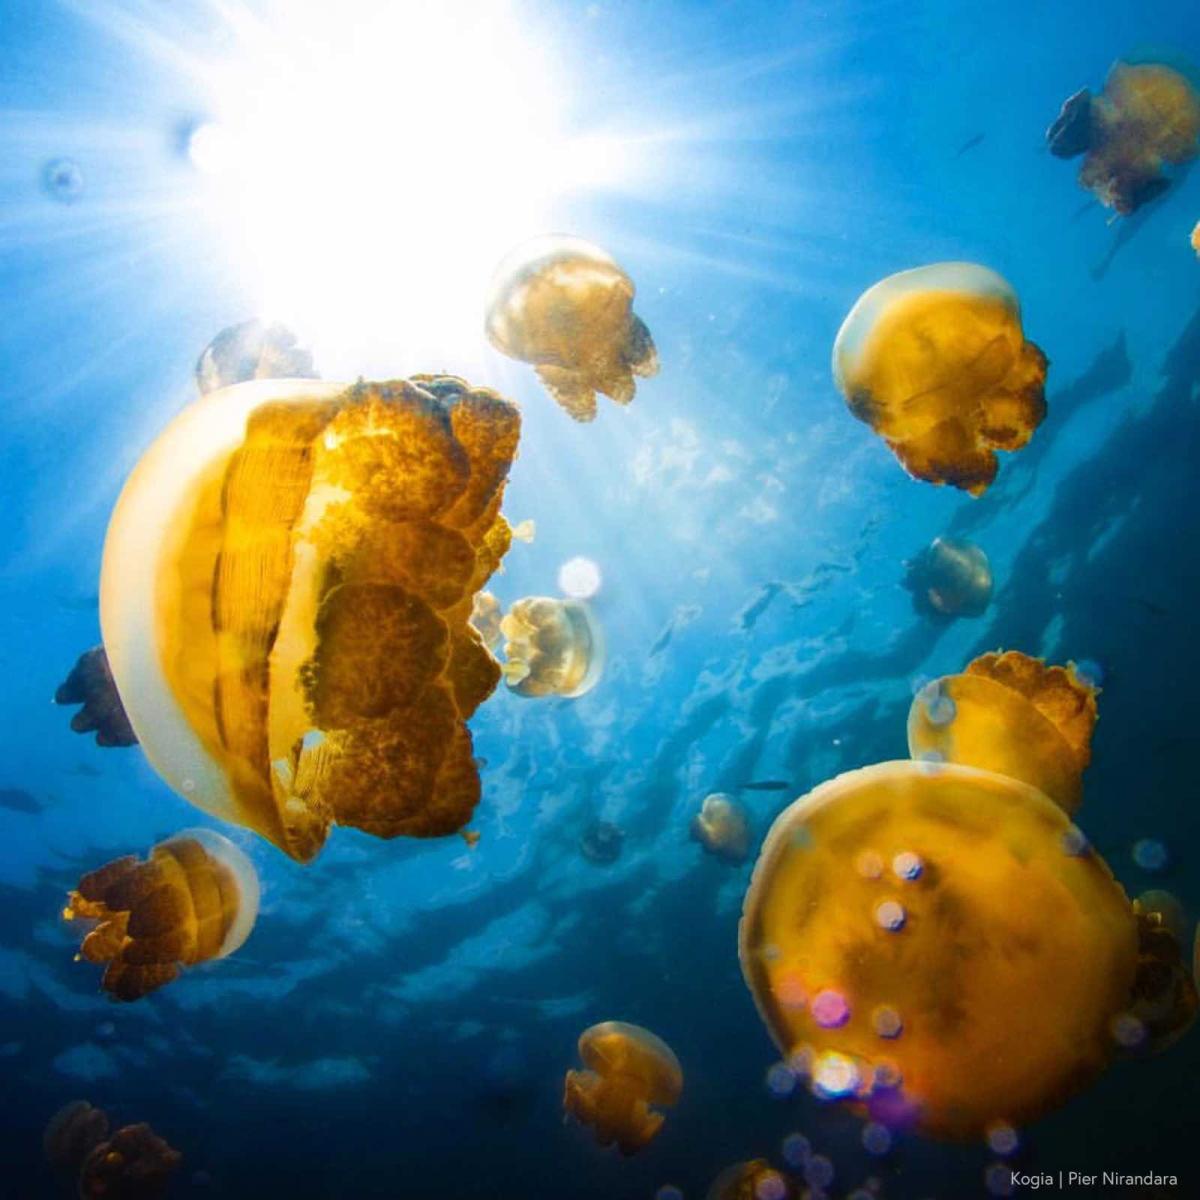 The sun beams down through the water's surface as bulbous yellow jellyfish float suspended in the water